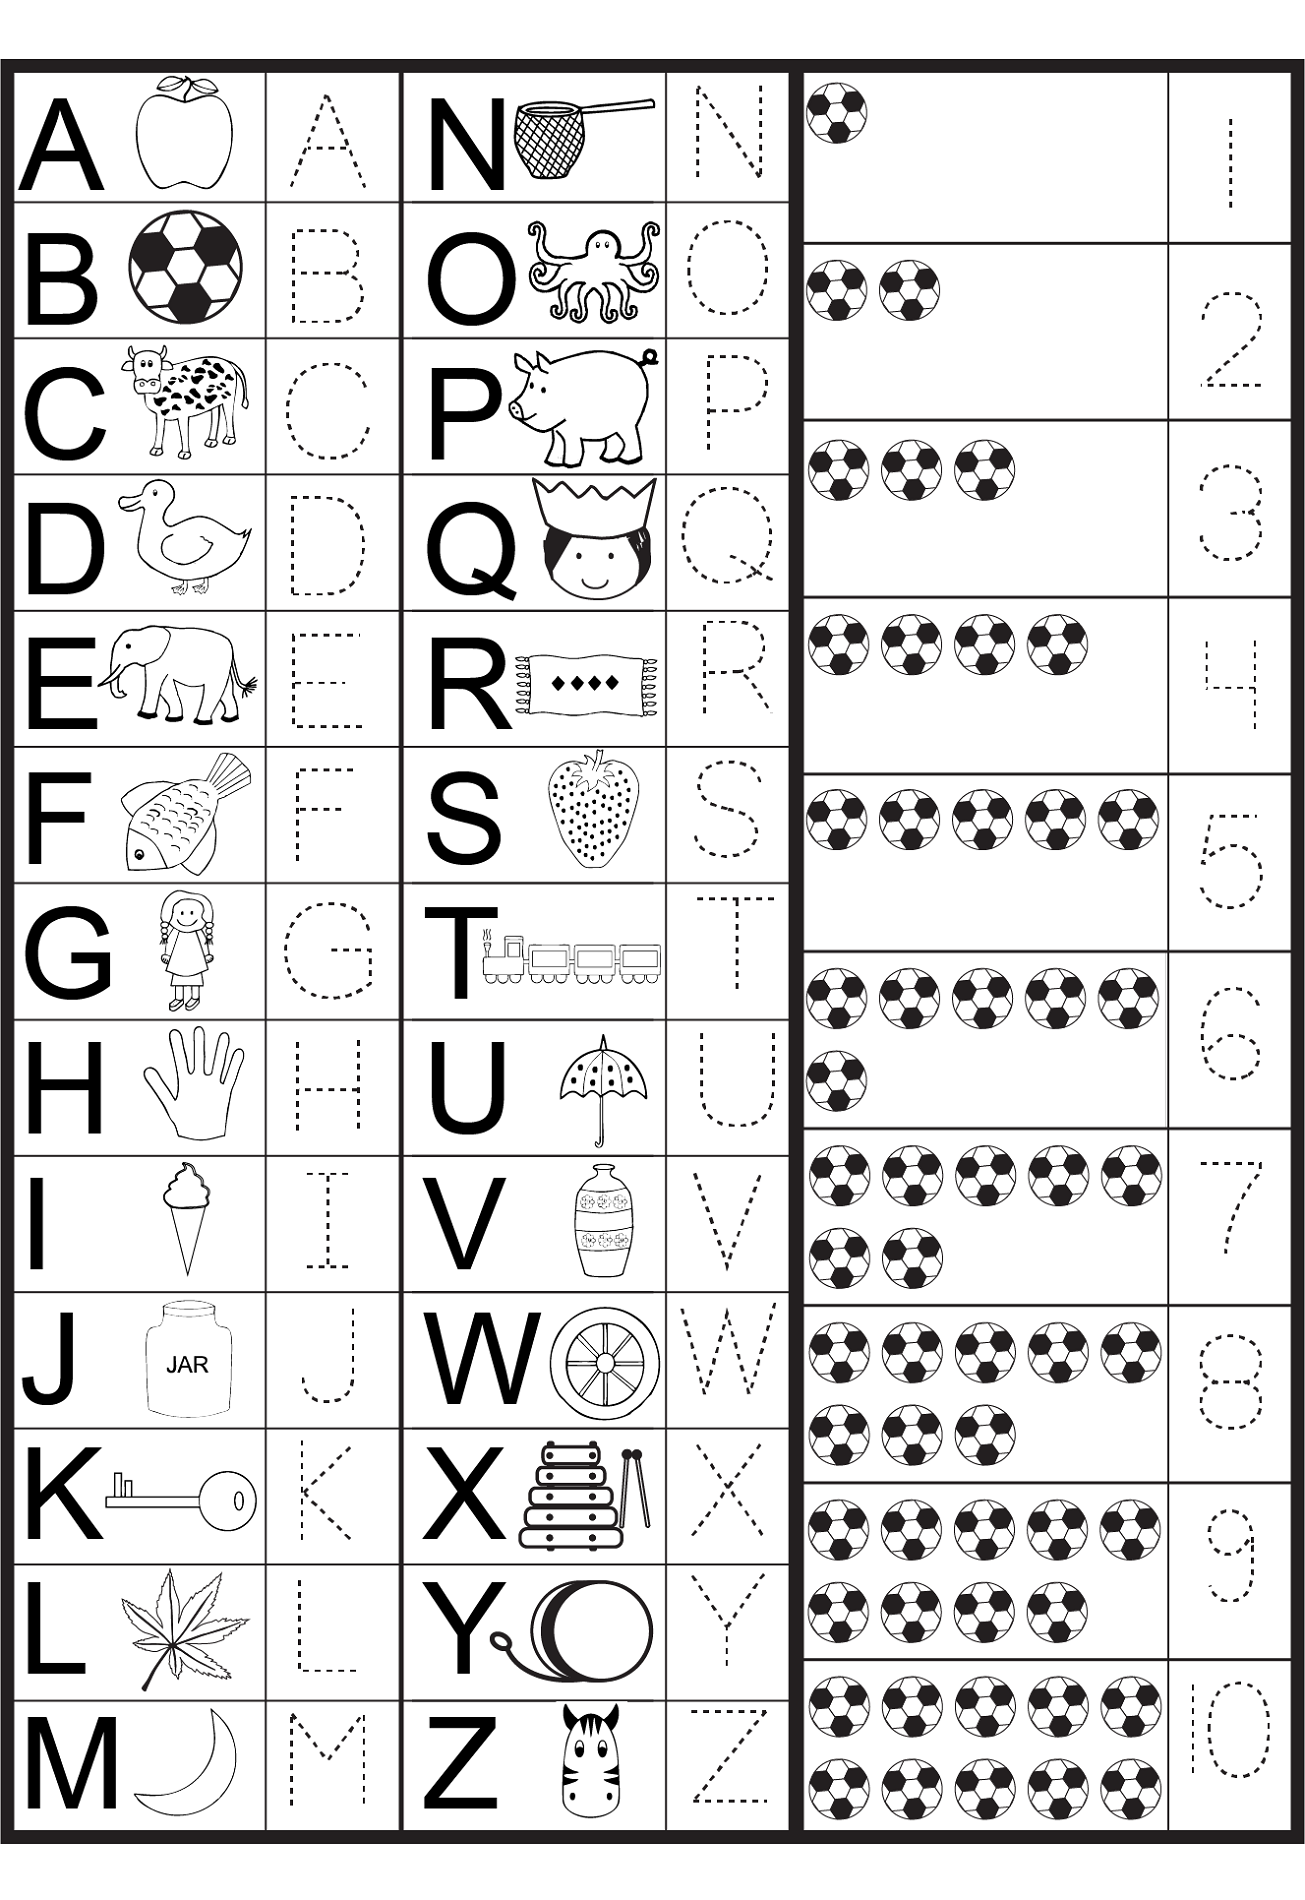 20-free-printable-abc-tracing-worksheets-free-coloring-pages